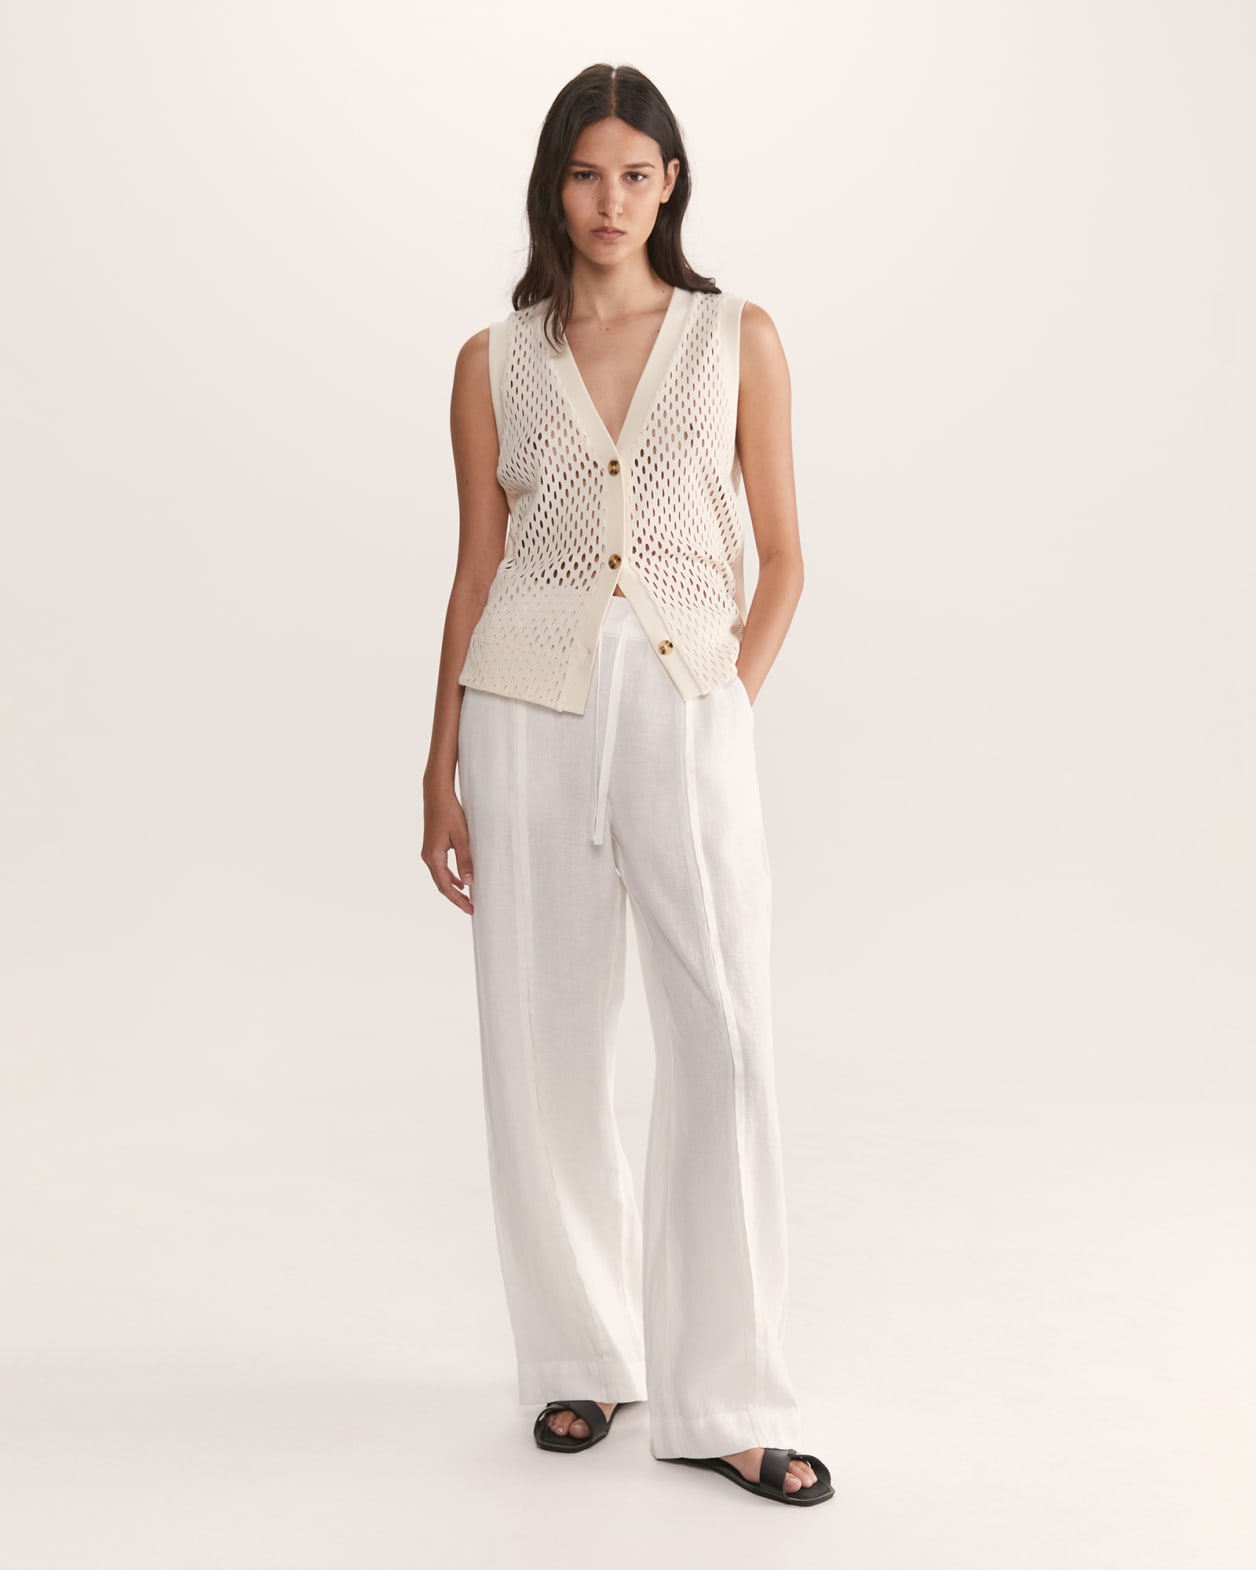 Lila Linen Detailed Pant in WHITE